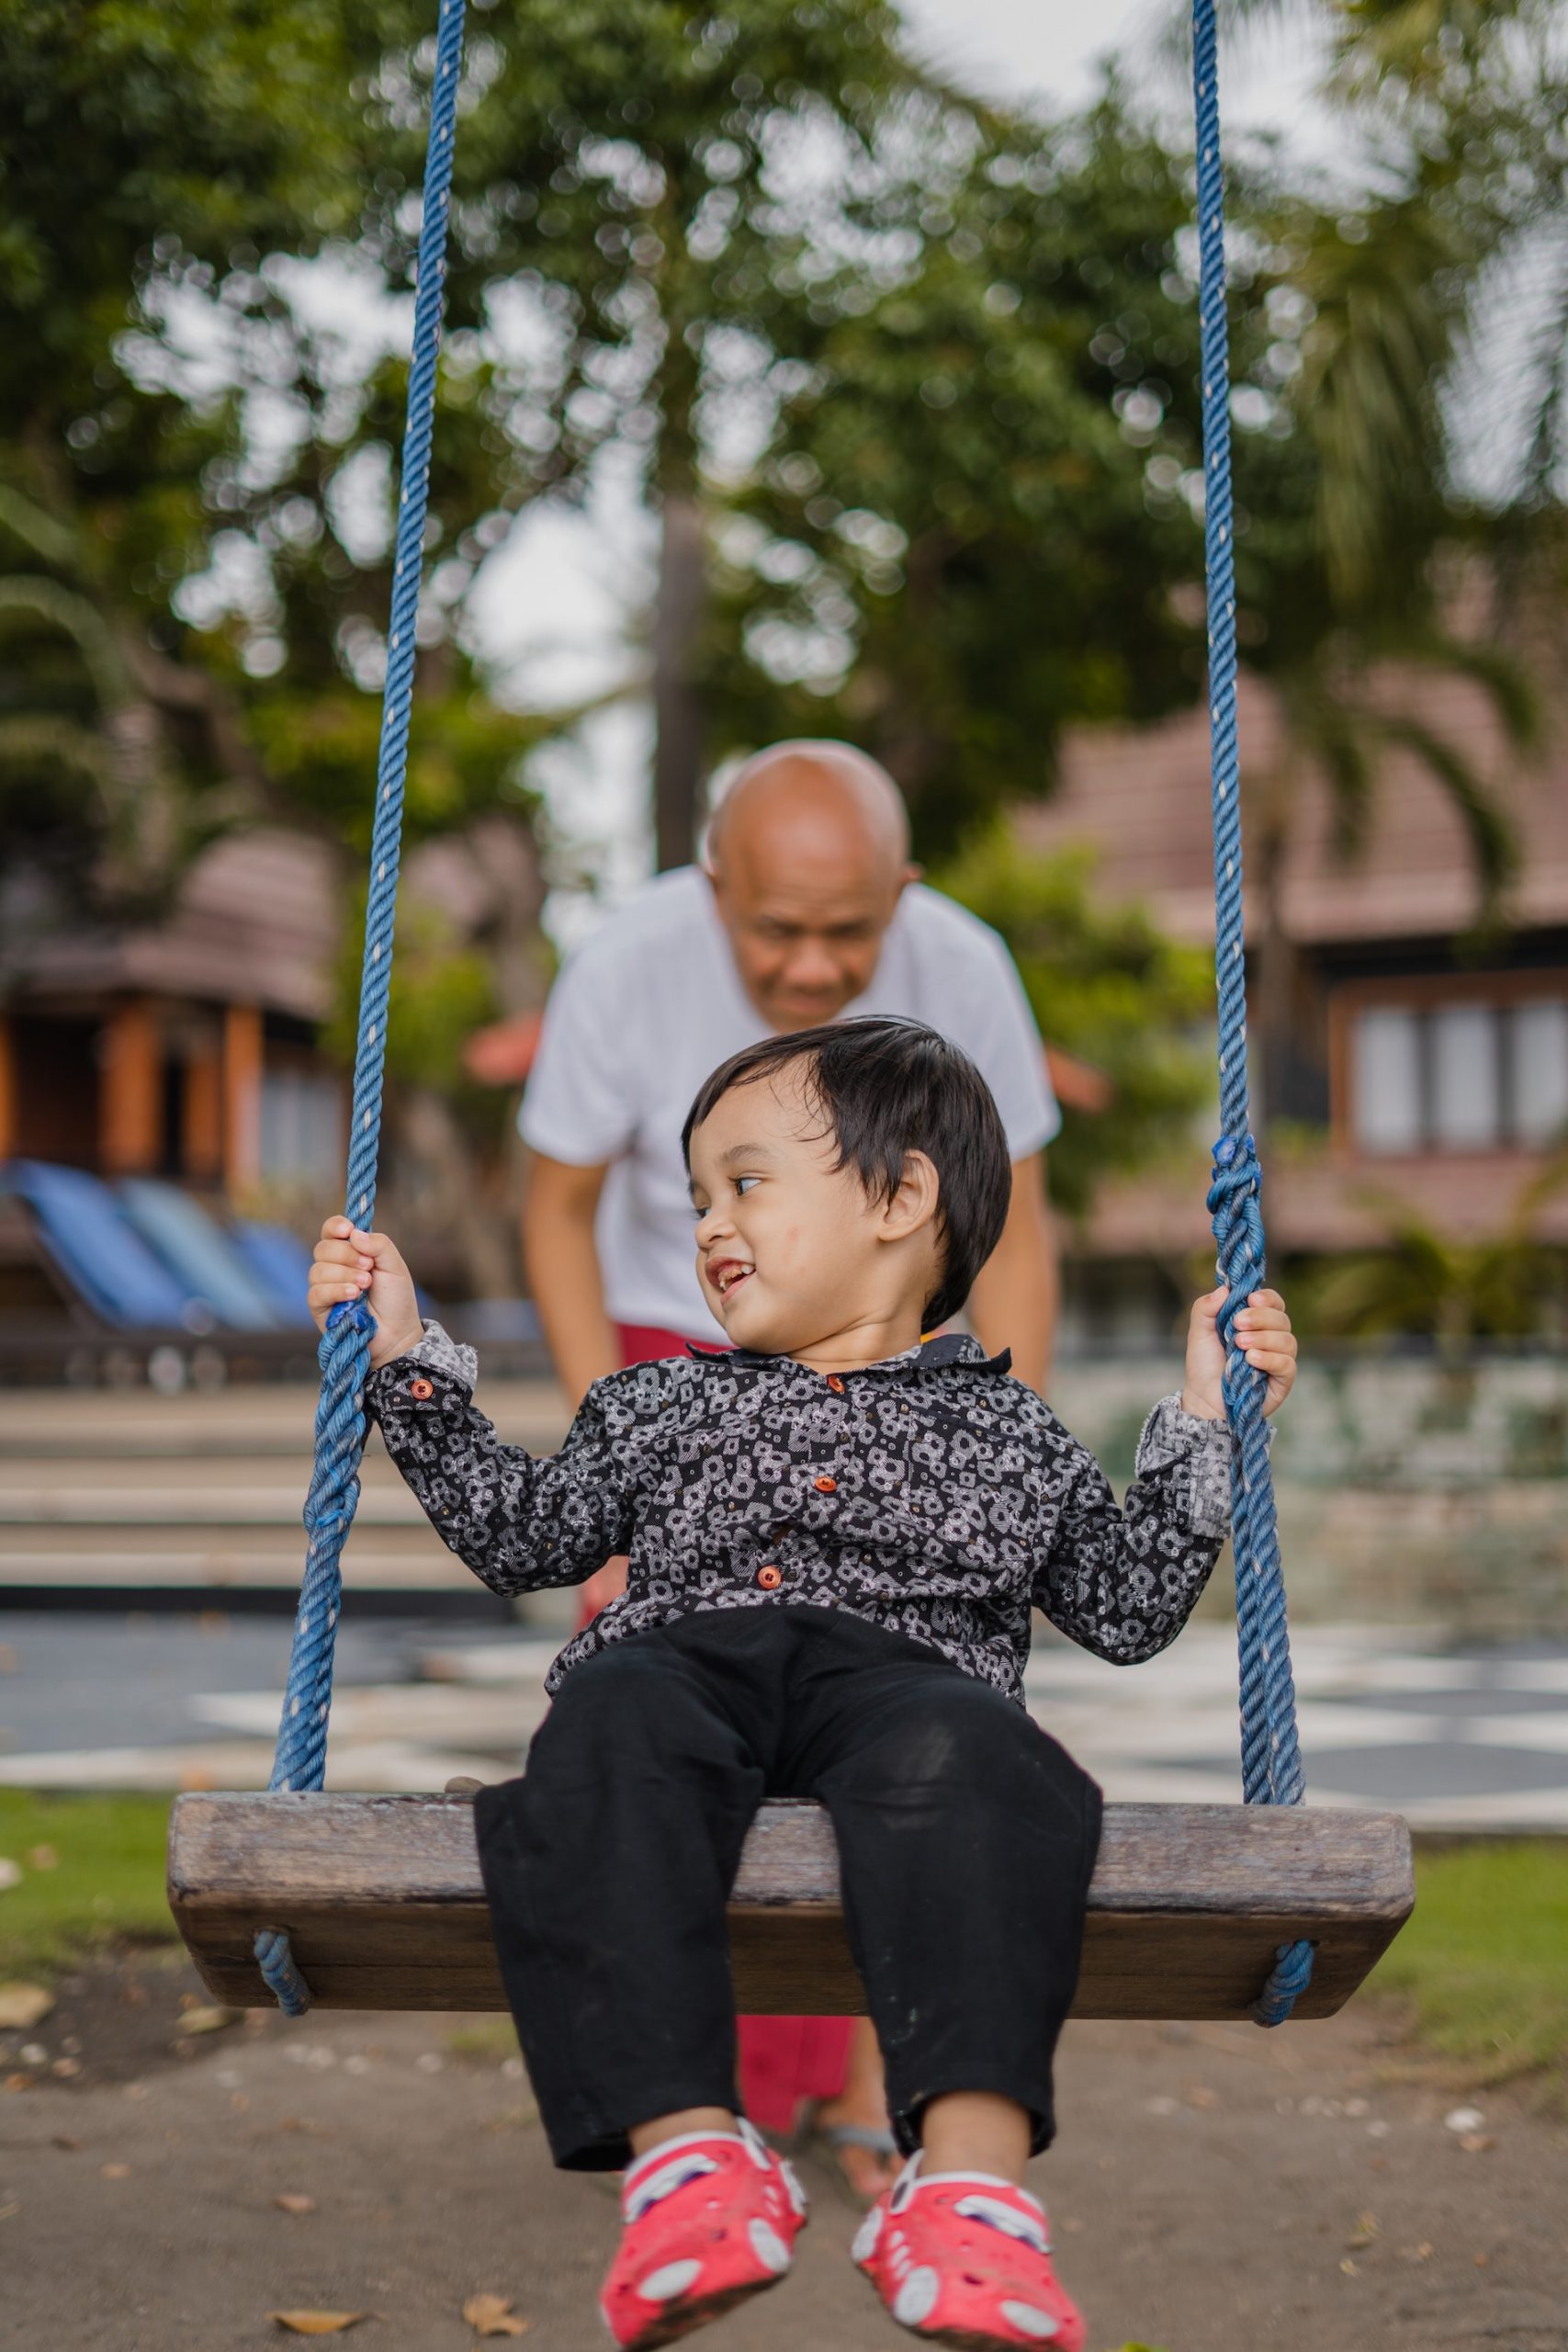 Child on swing being pushed on the swing by grandfather.